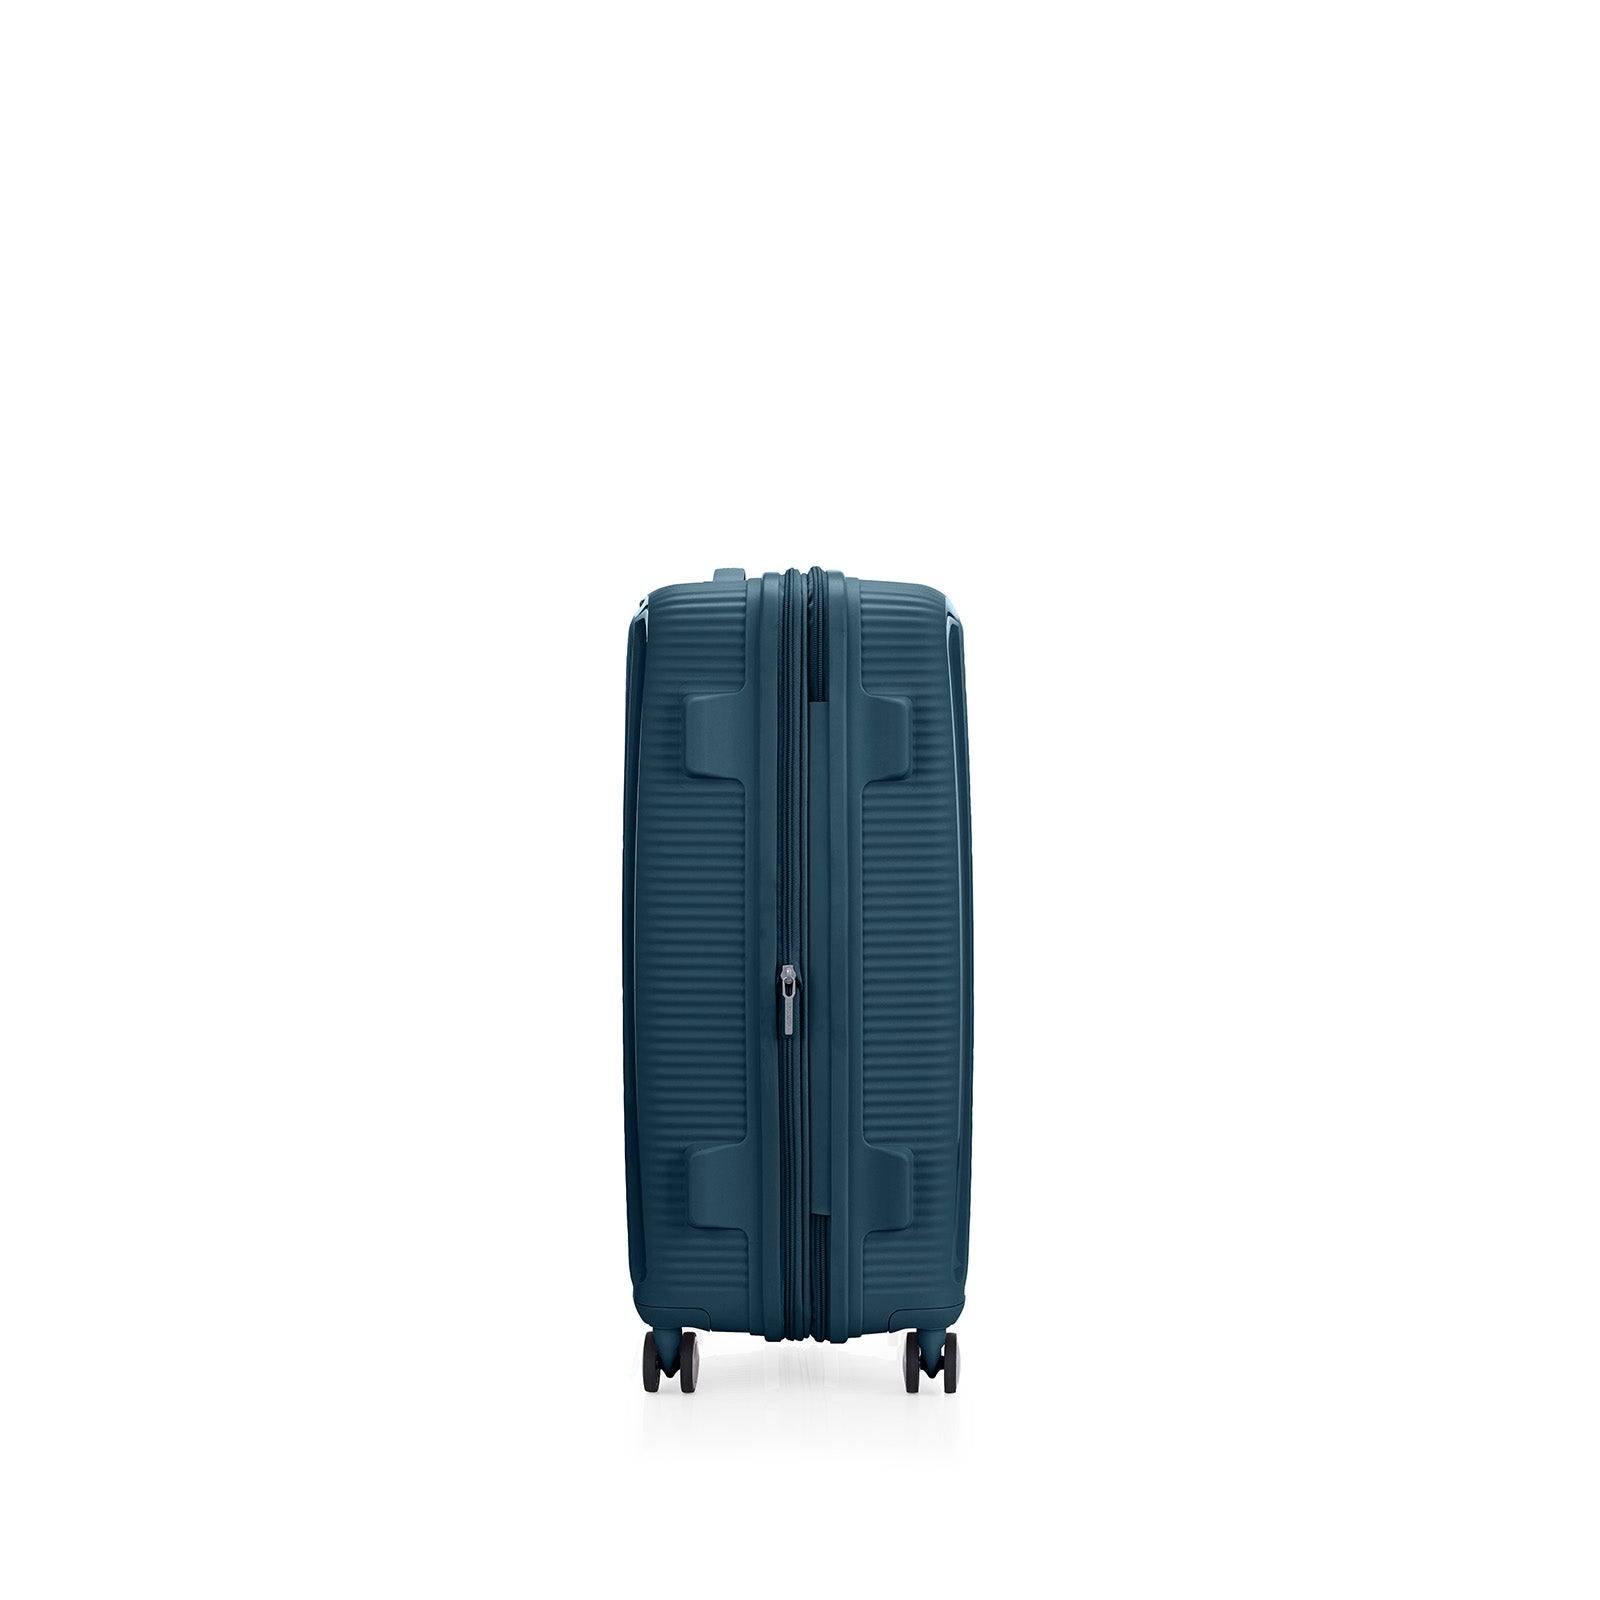 American-Tourister-Curio-2-69cm-Suitcase-Varisty-Green-Side